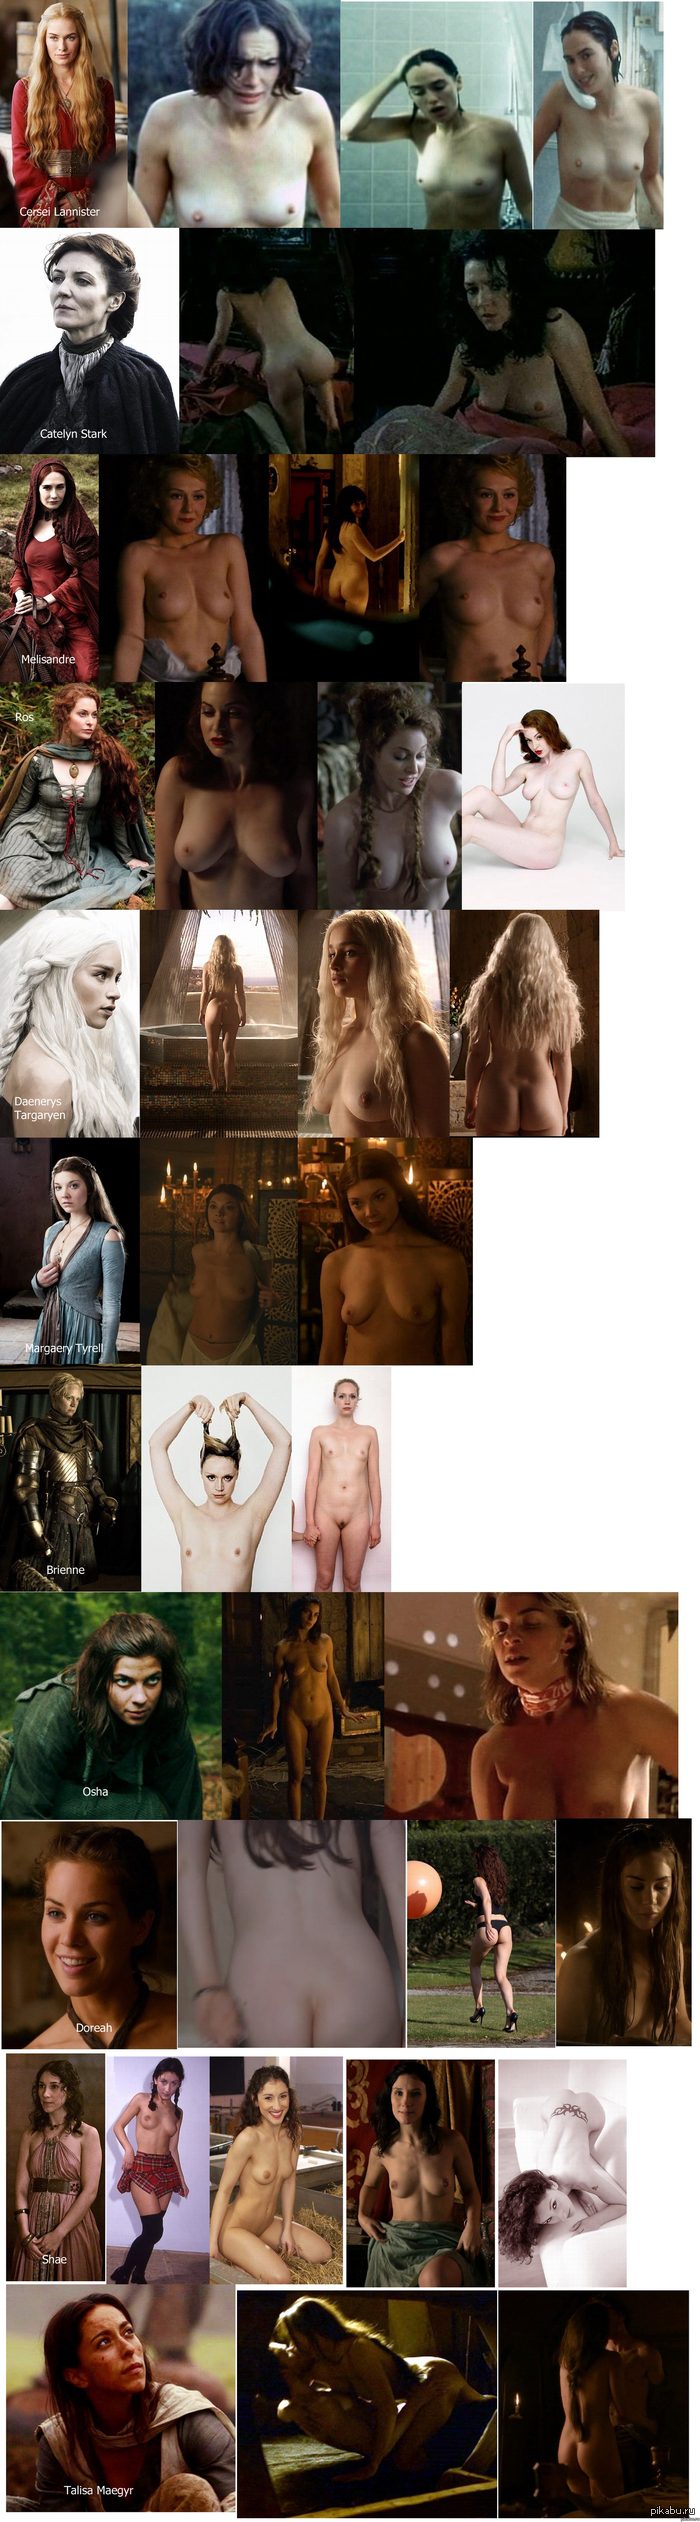 Game of Thrones - NSFW, Game of Thrones, Naked